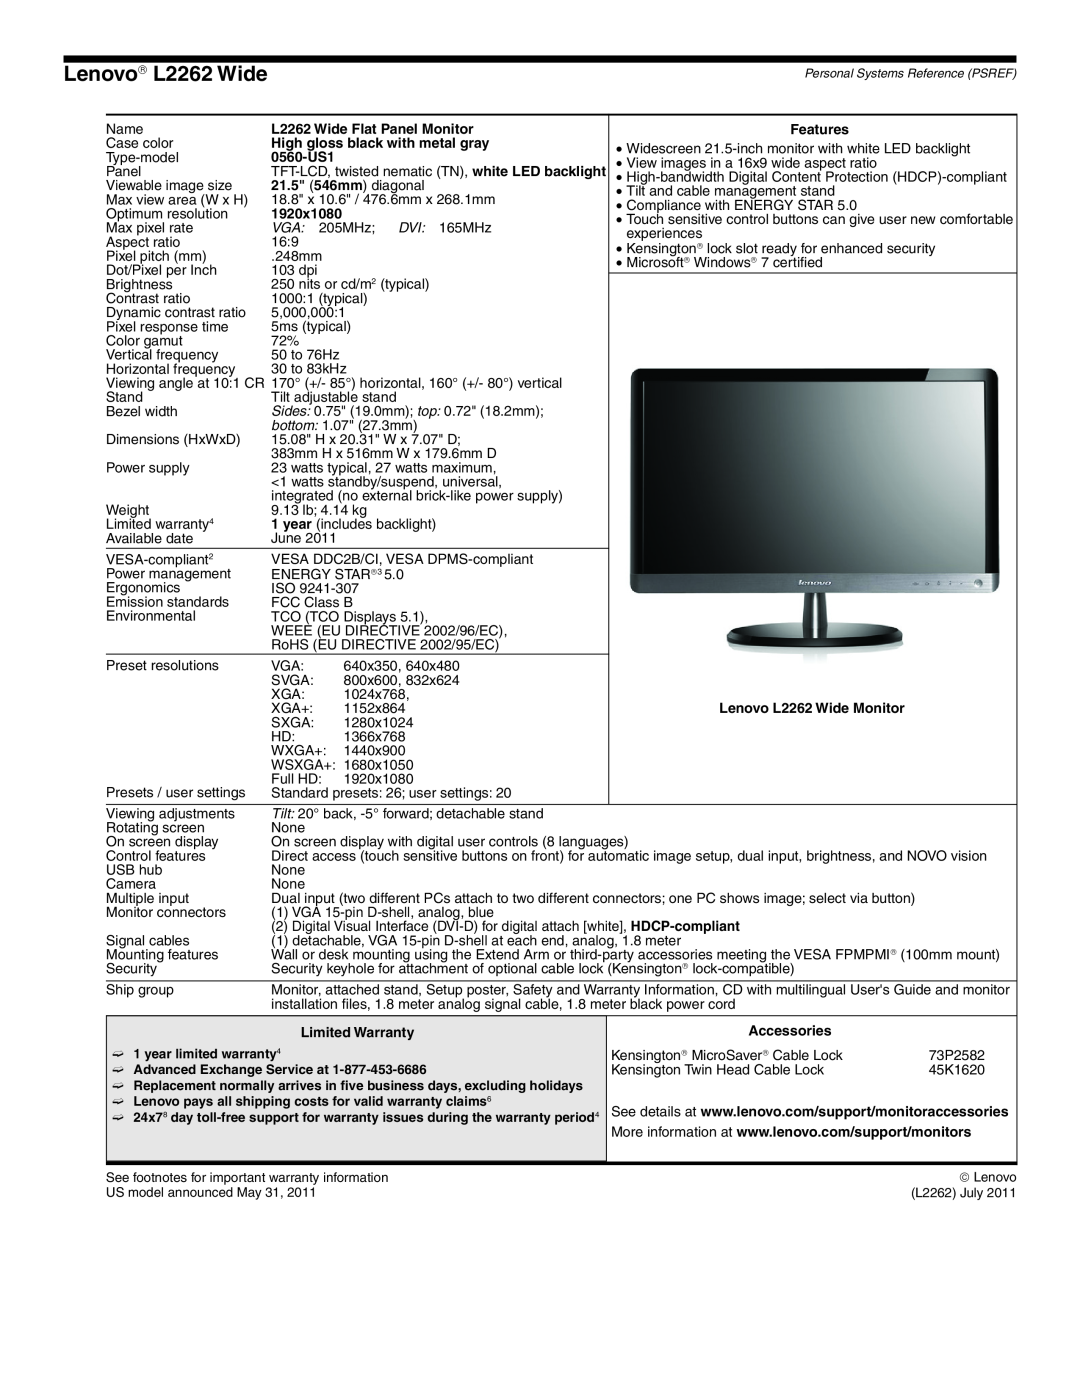 Lenovo L2363D Lenovo→ L2262 Wide, L2262 Wide Flat Panel Monitor, Features, High gloss black with metal gray, 0560-US1 